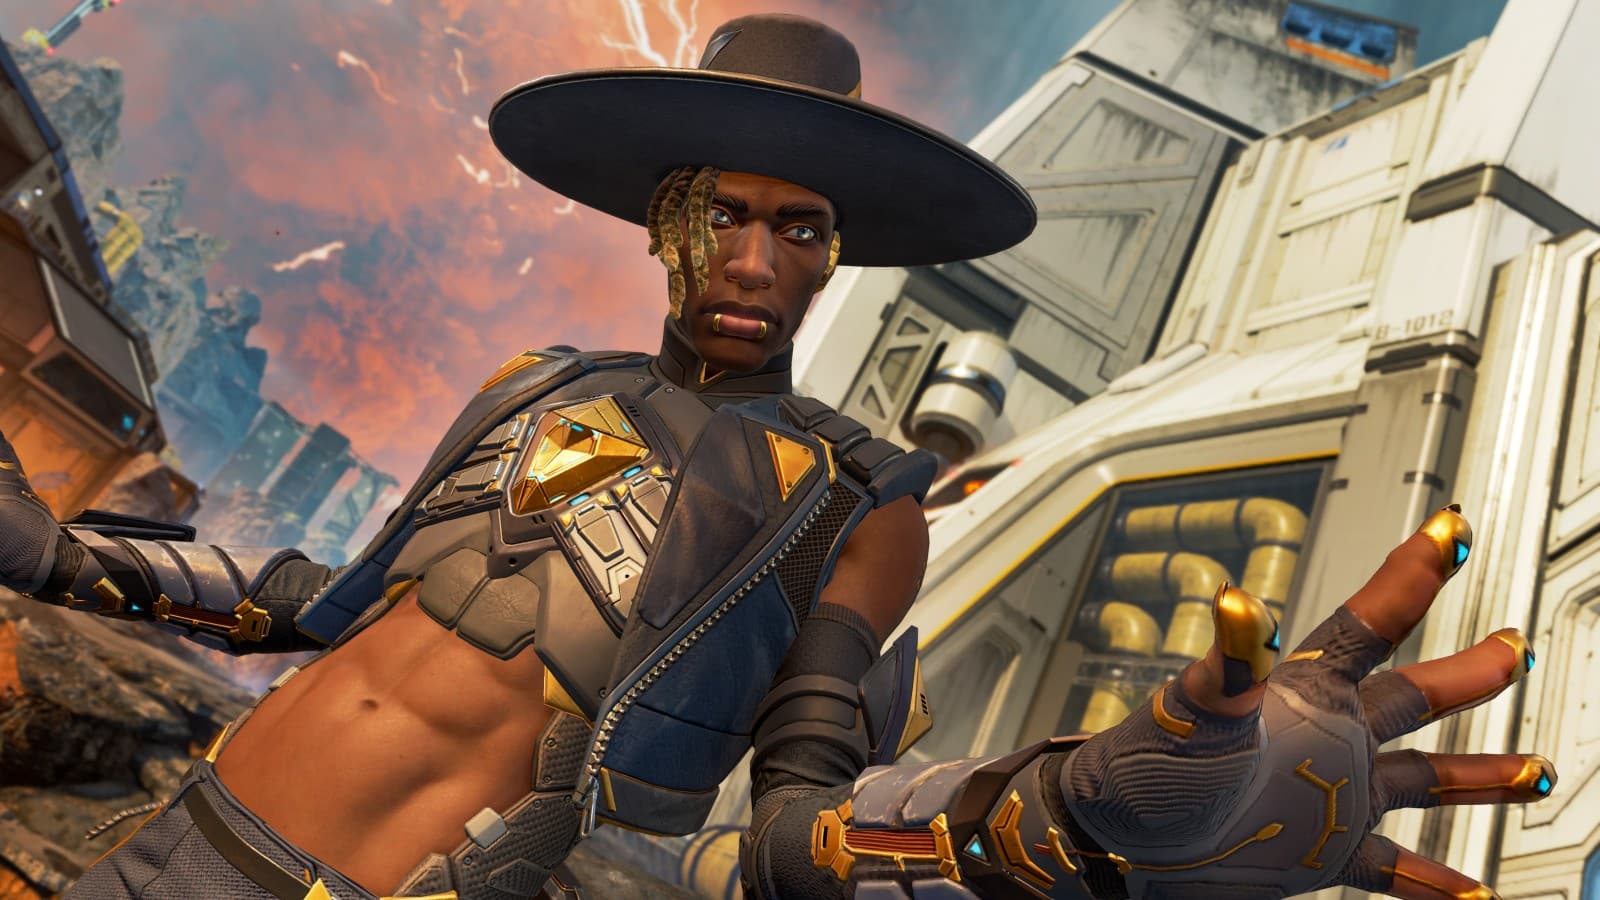 Pansexual character Seer appearing in Apex Legends